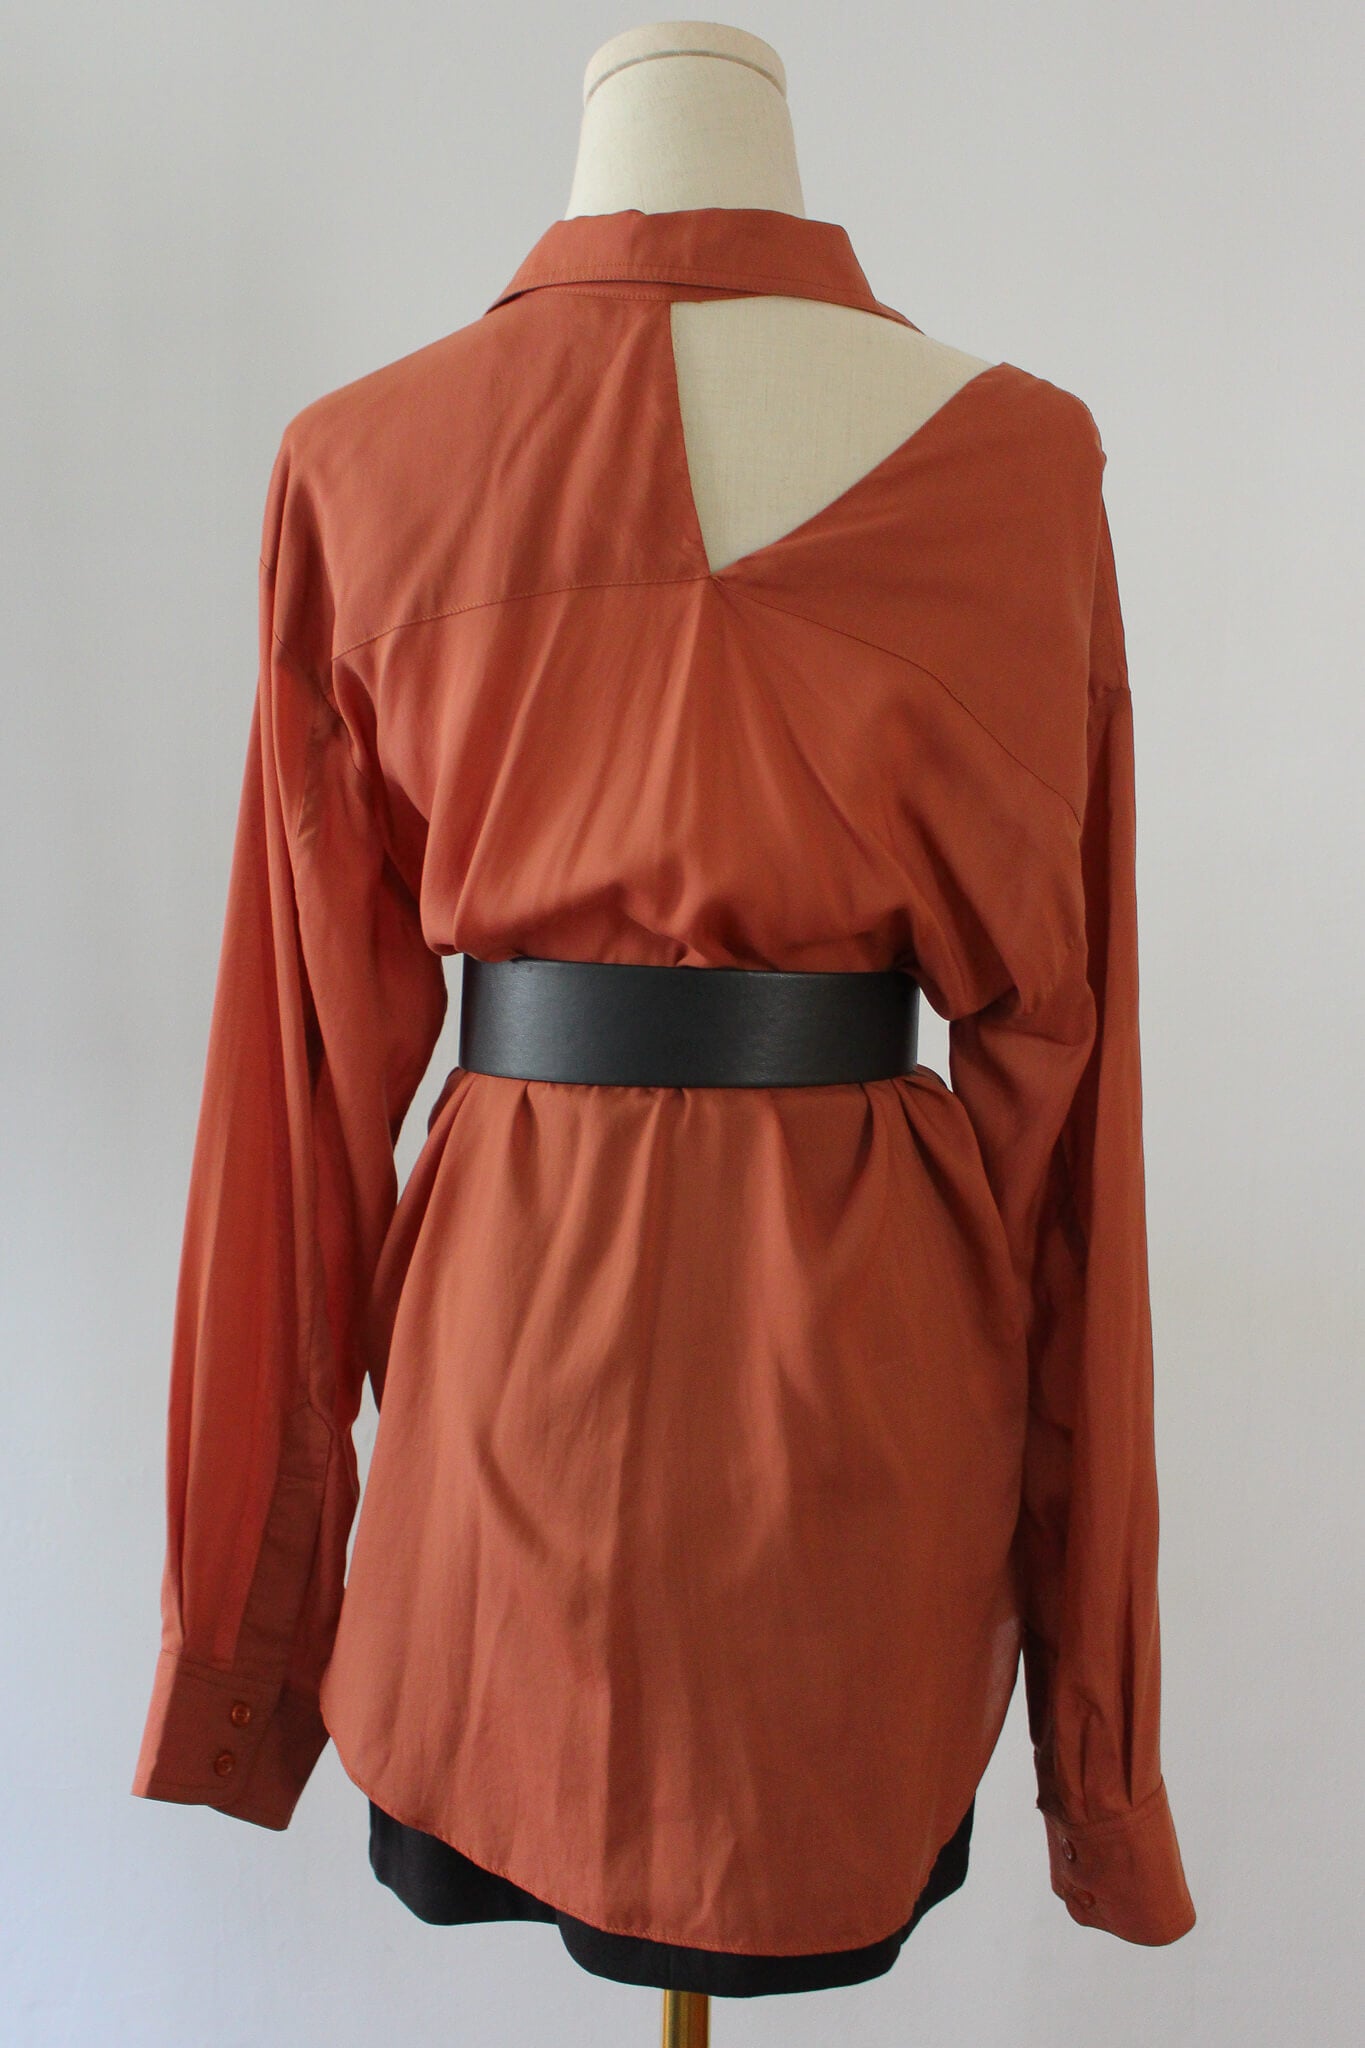 Soft, thin and silky shirt that can be worn as outerwear. Features a cut-out on collarbone area